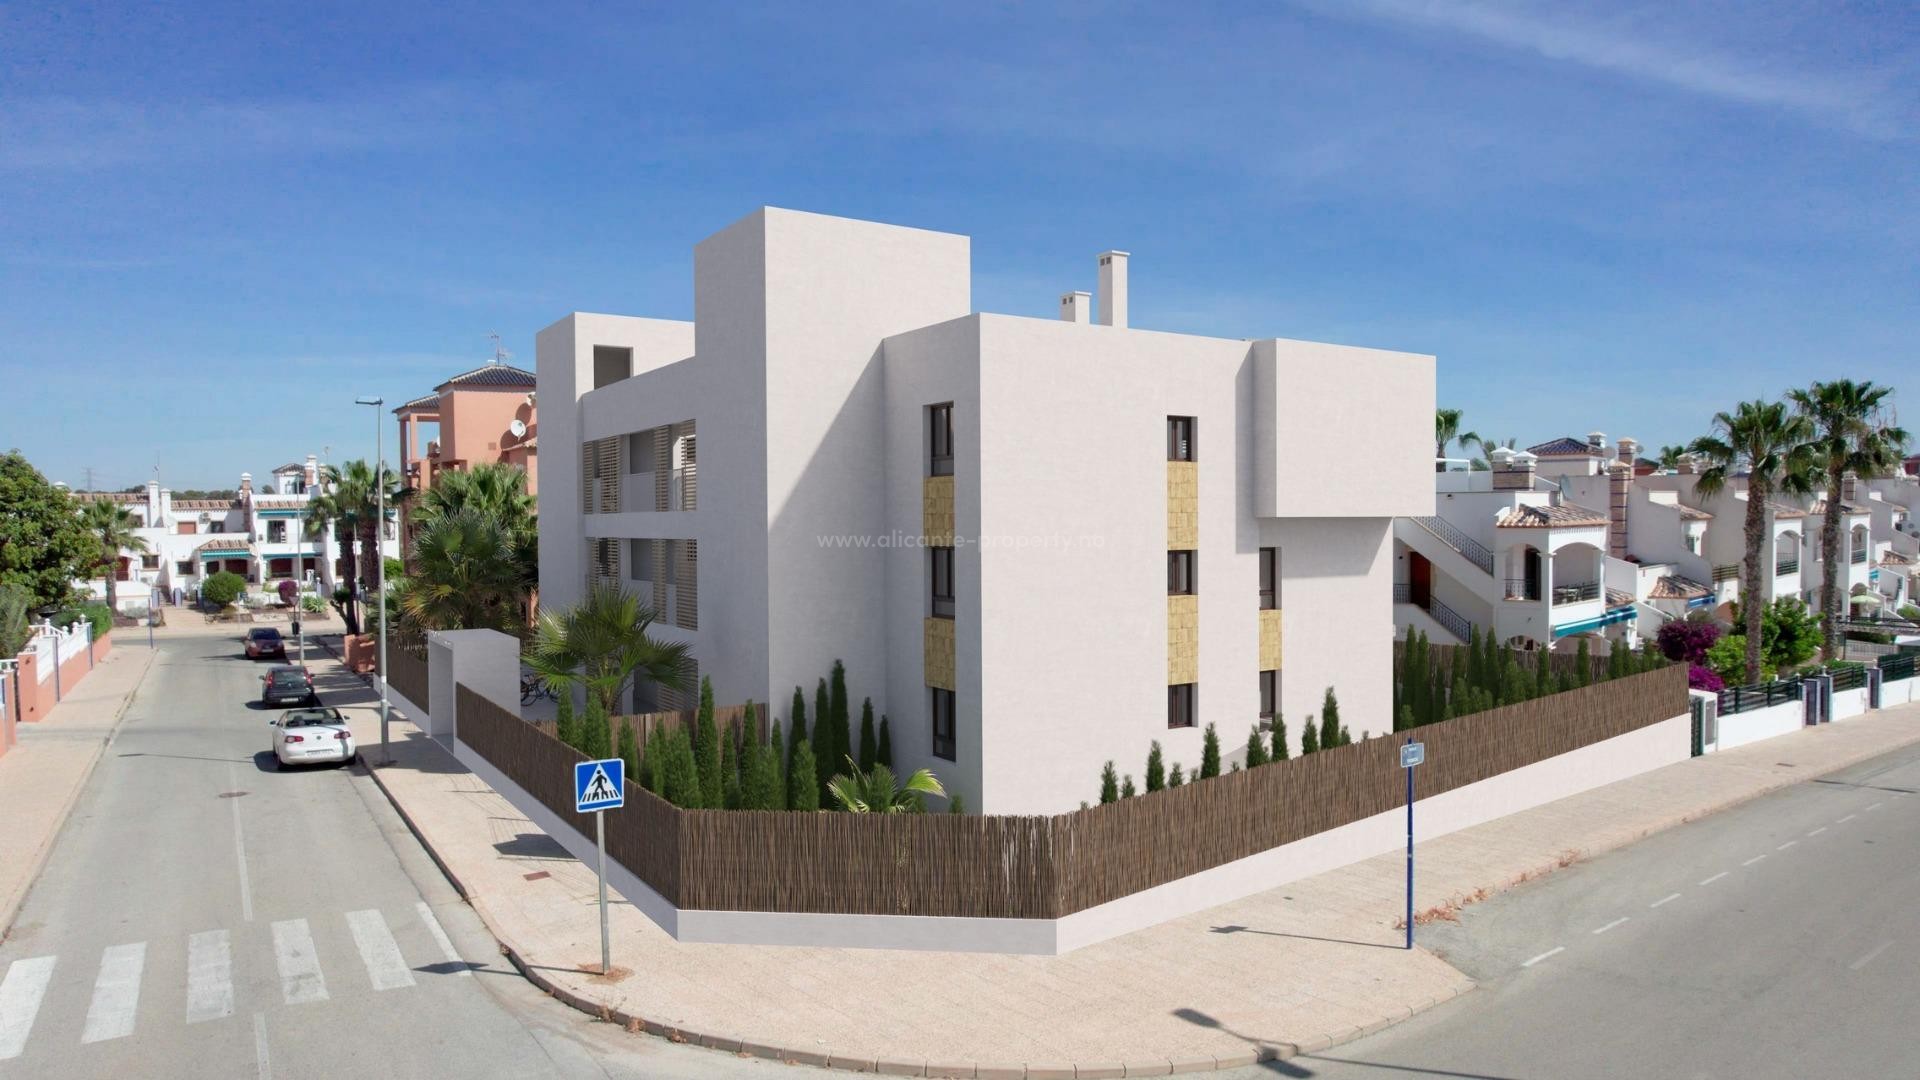 Buying a flat in a residential complex in Orihuela Costa? Different types of apartments with very nice common areas, including a great swimming pool